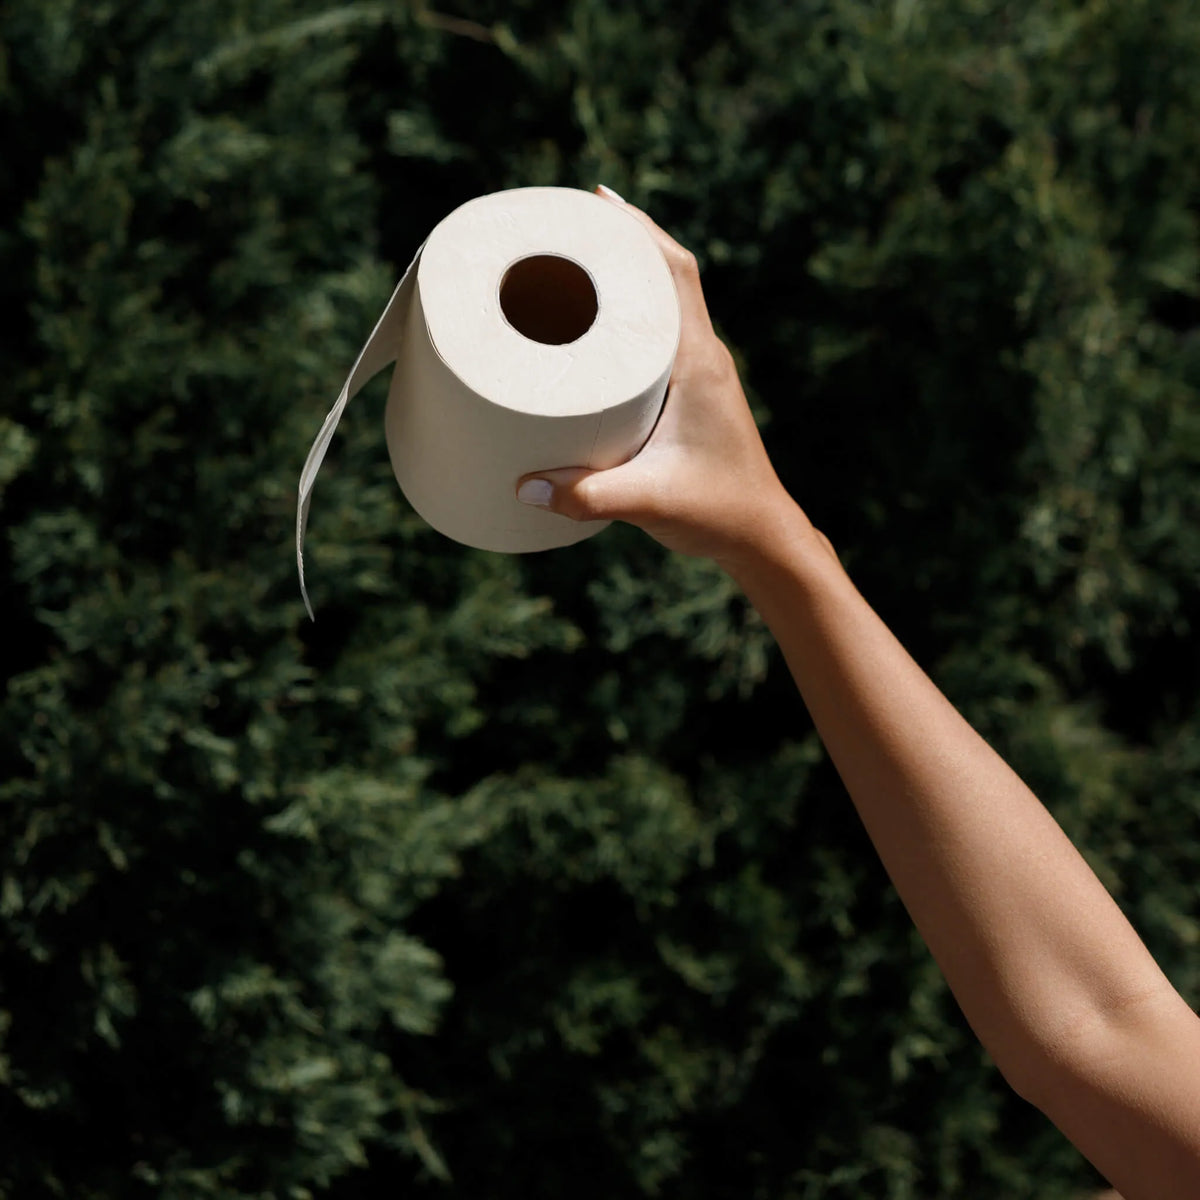 Reusable Toilet Paper: Pros & Cons, Making Your Own, How to Clean